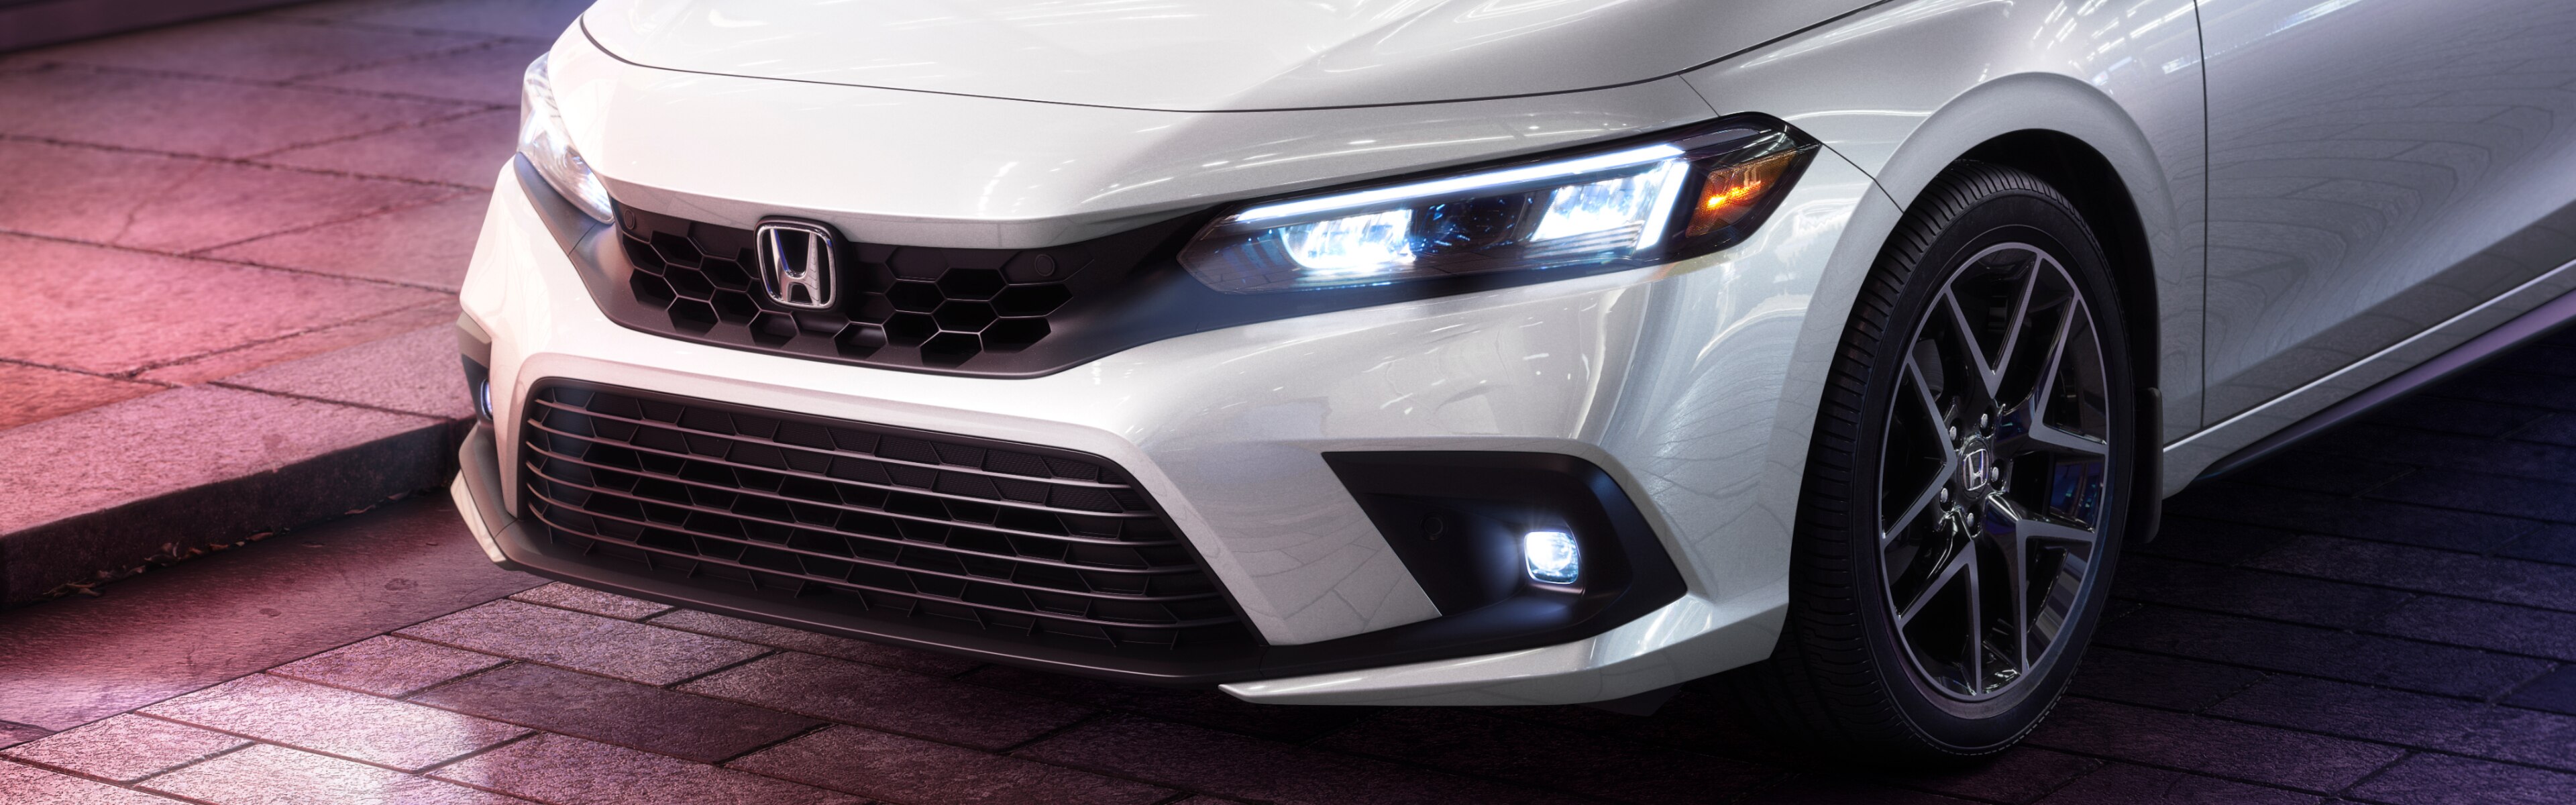 Side-angled close-up of white Honda Civic Hatchback with headlights shining on a brick road
.